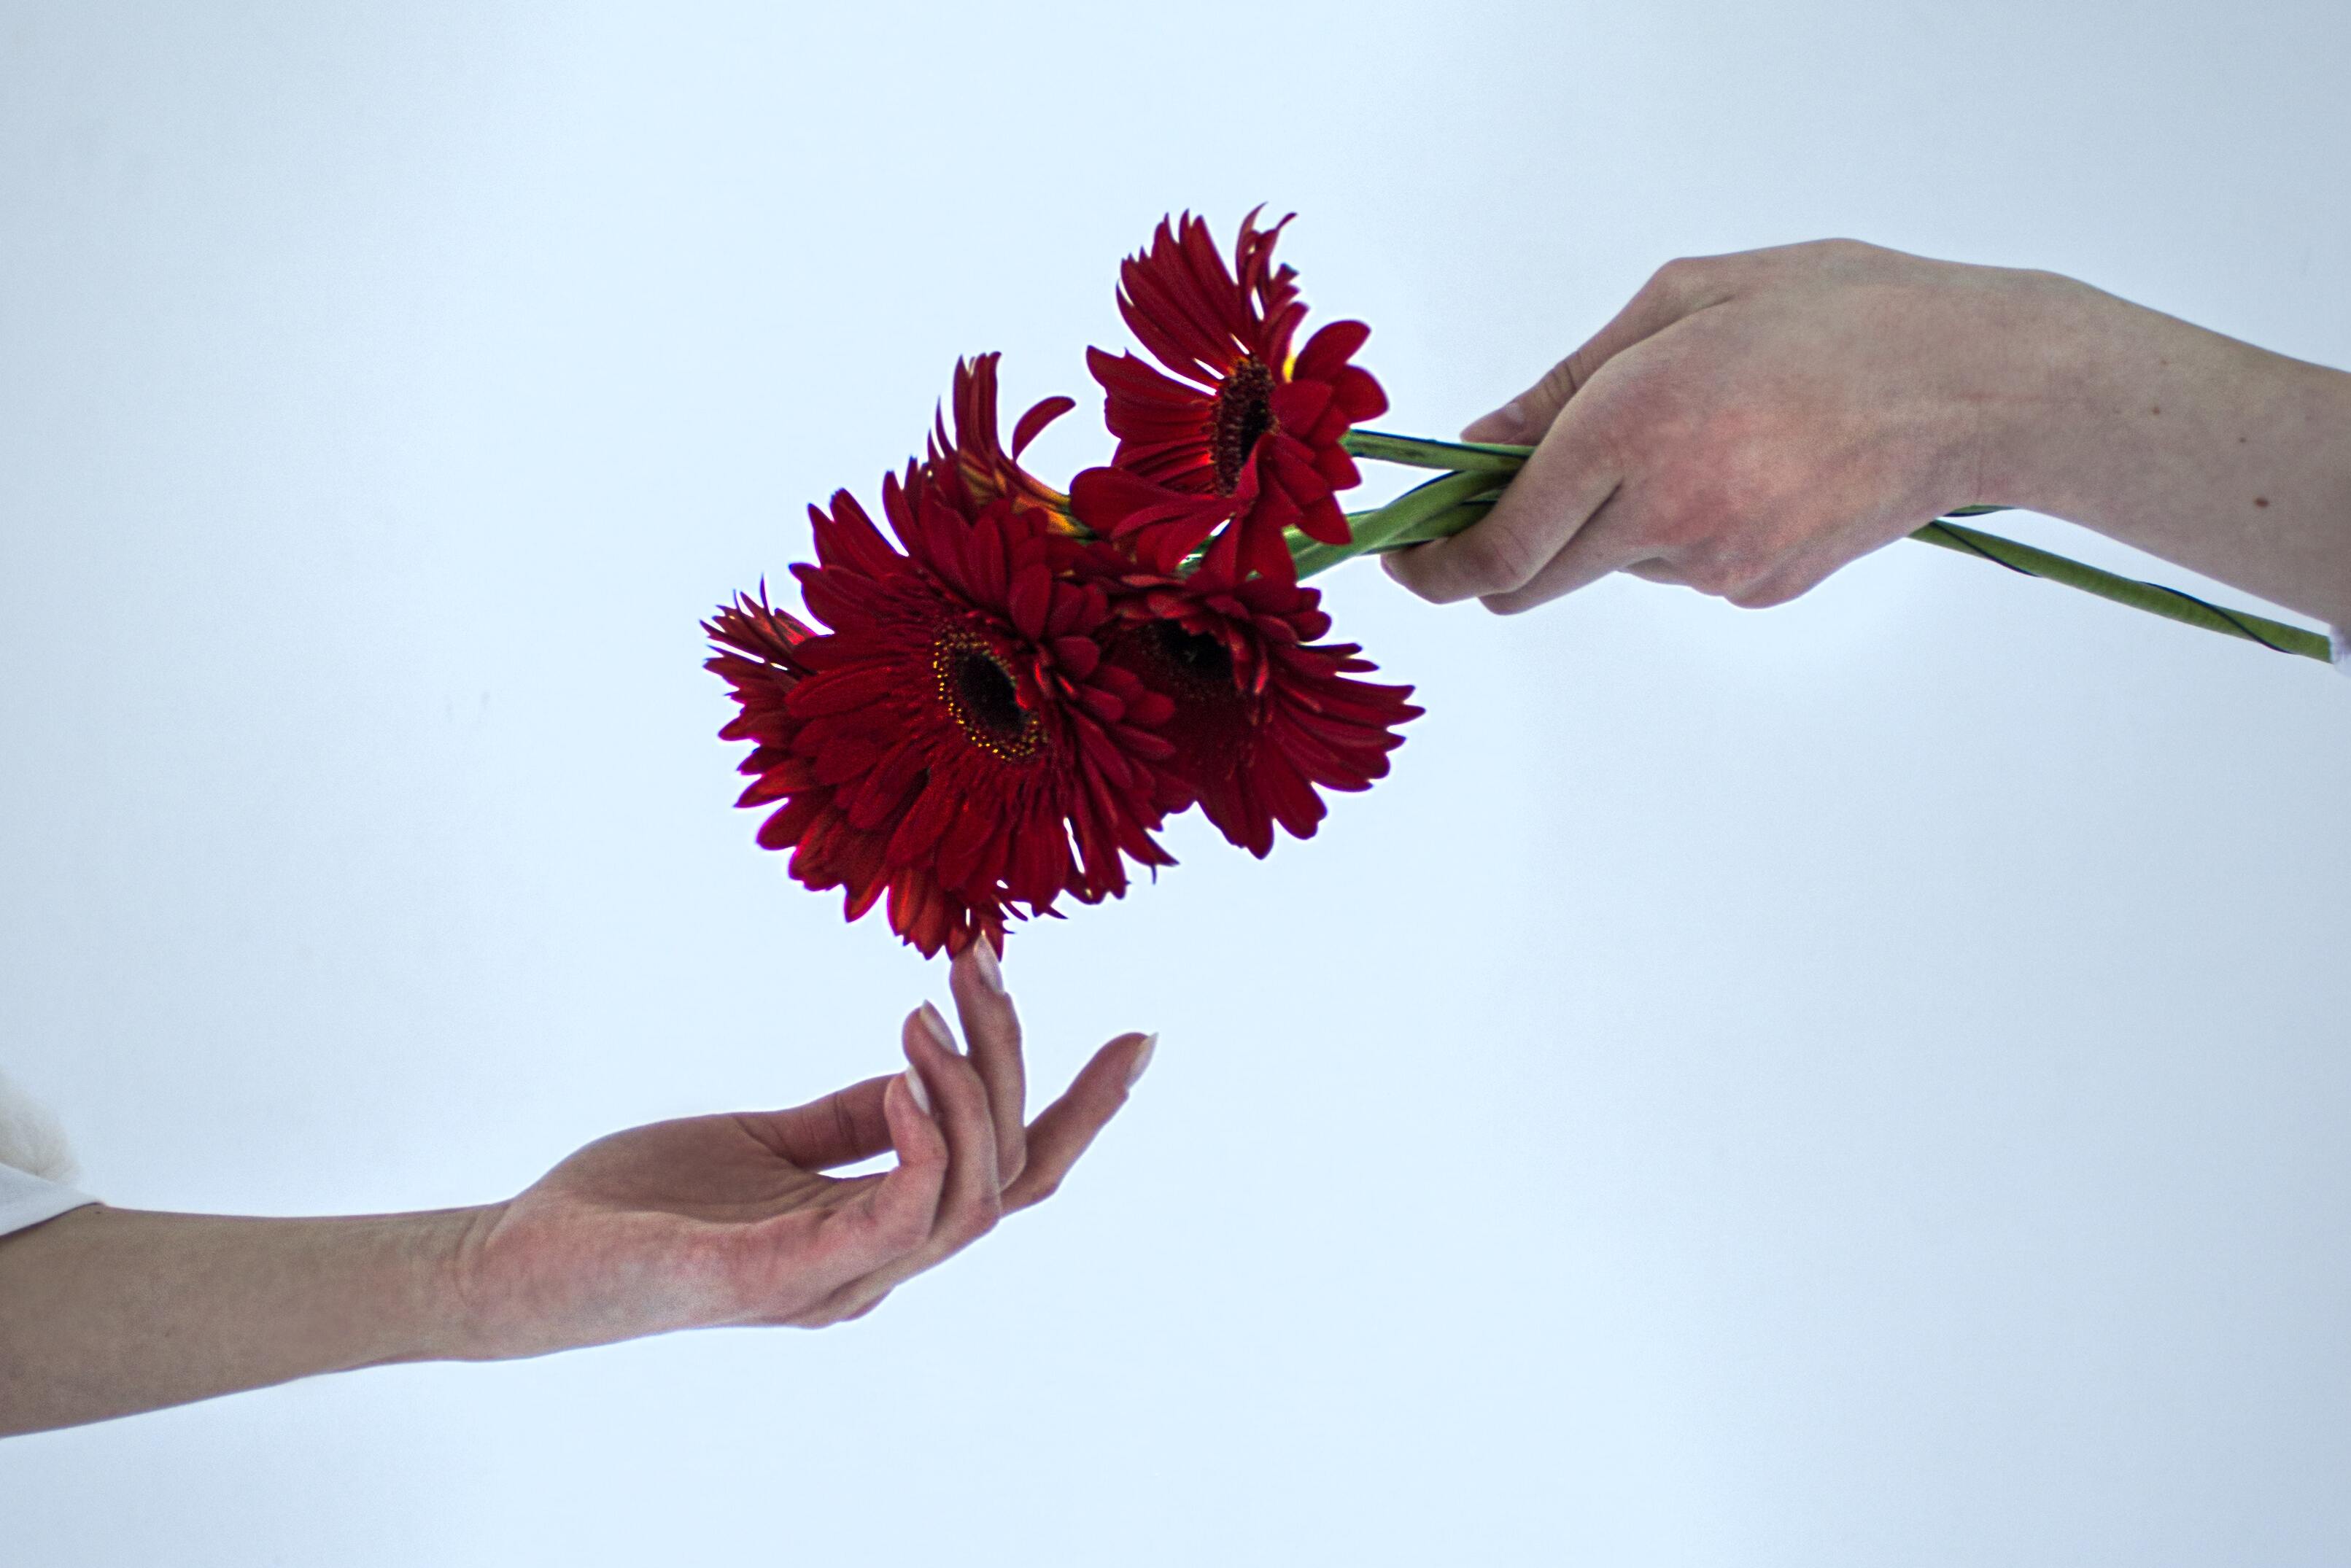 Two hands giving and accepting a gift of flowers.